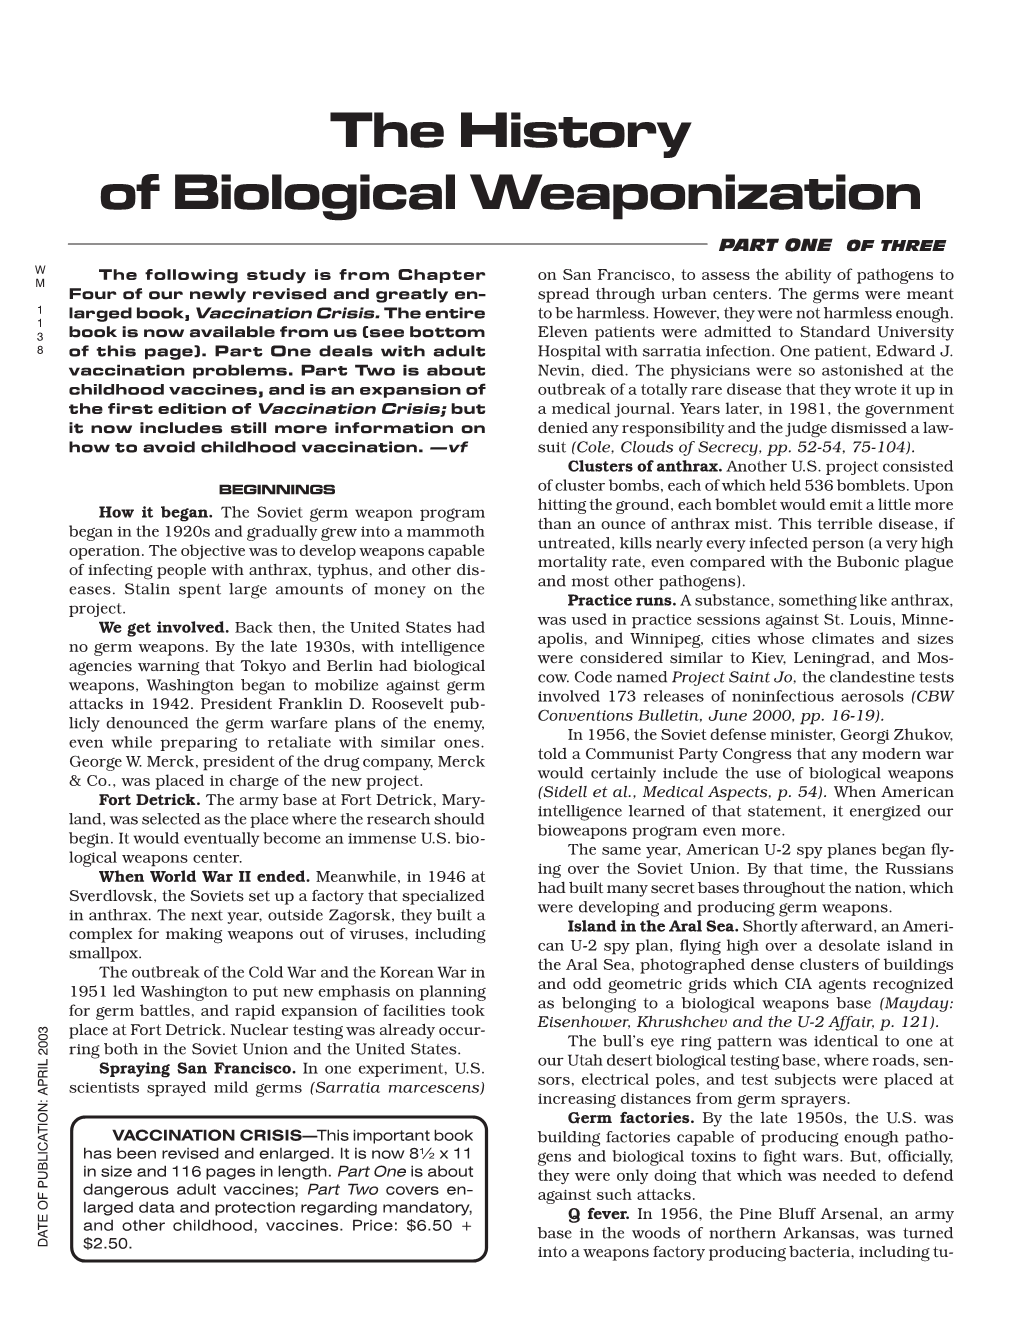 The History of Biological Weaponization